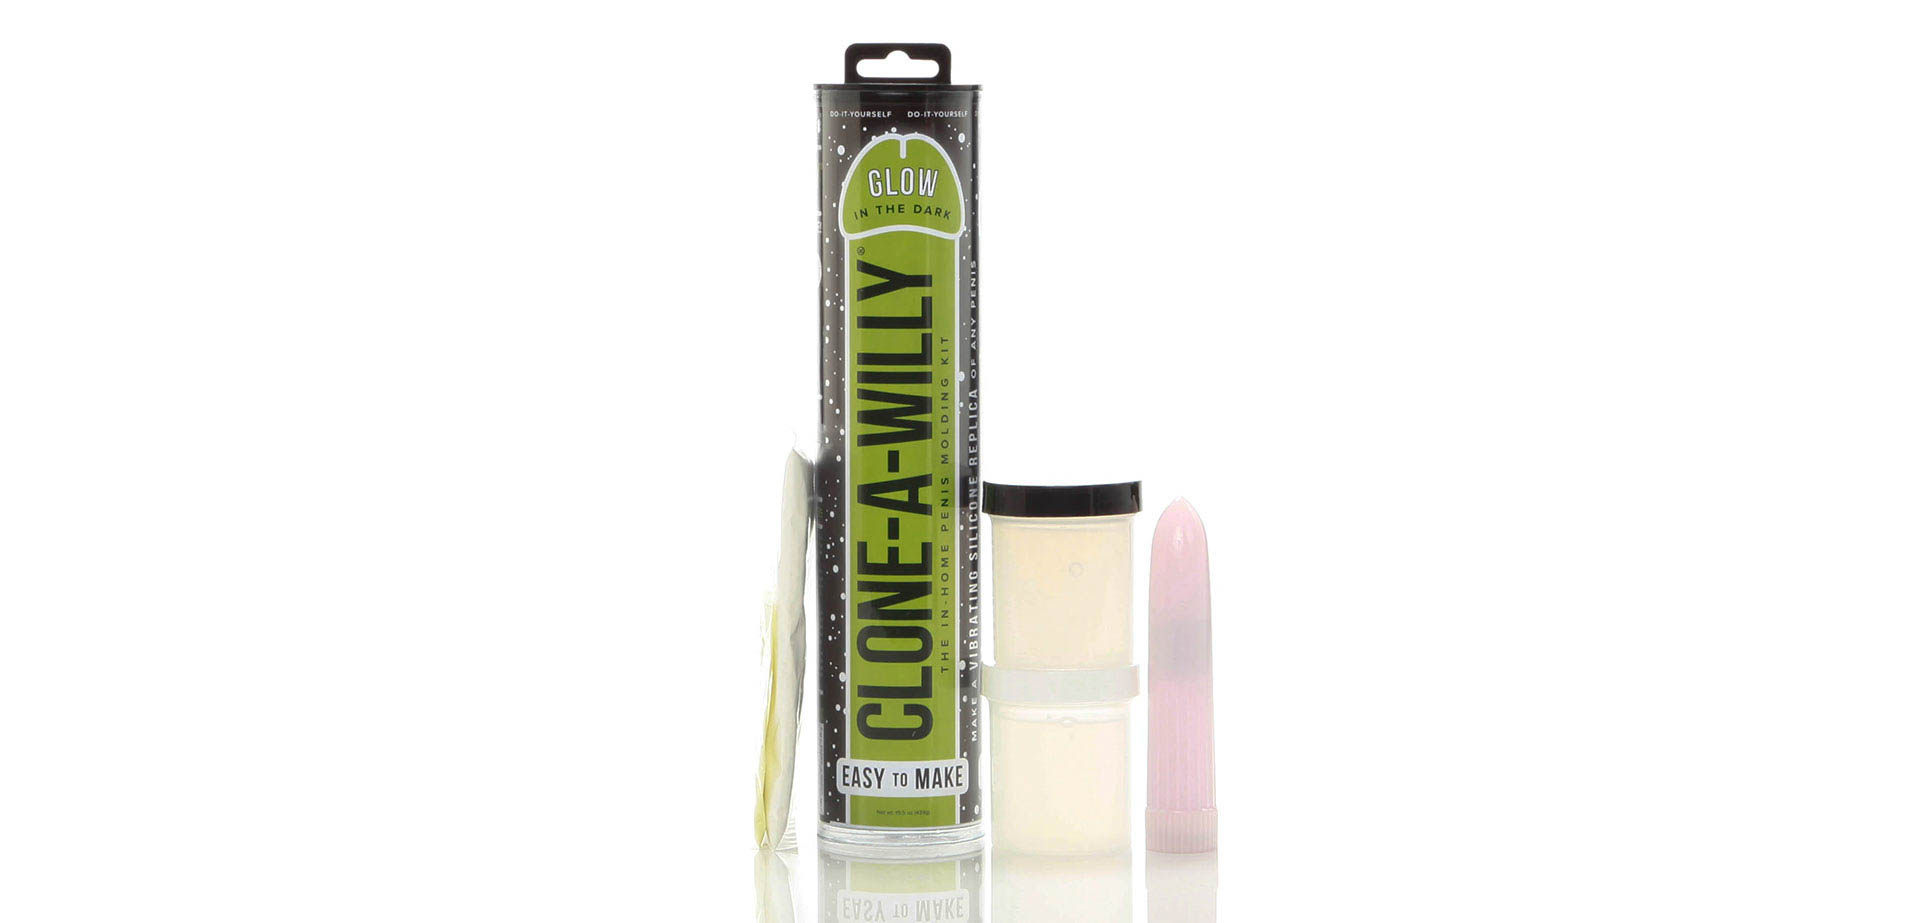 Clone-a-Willy Glow-in-the-Dark Kit.